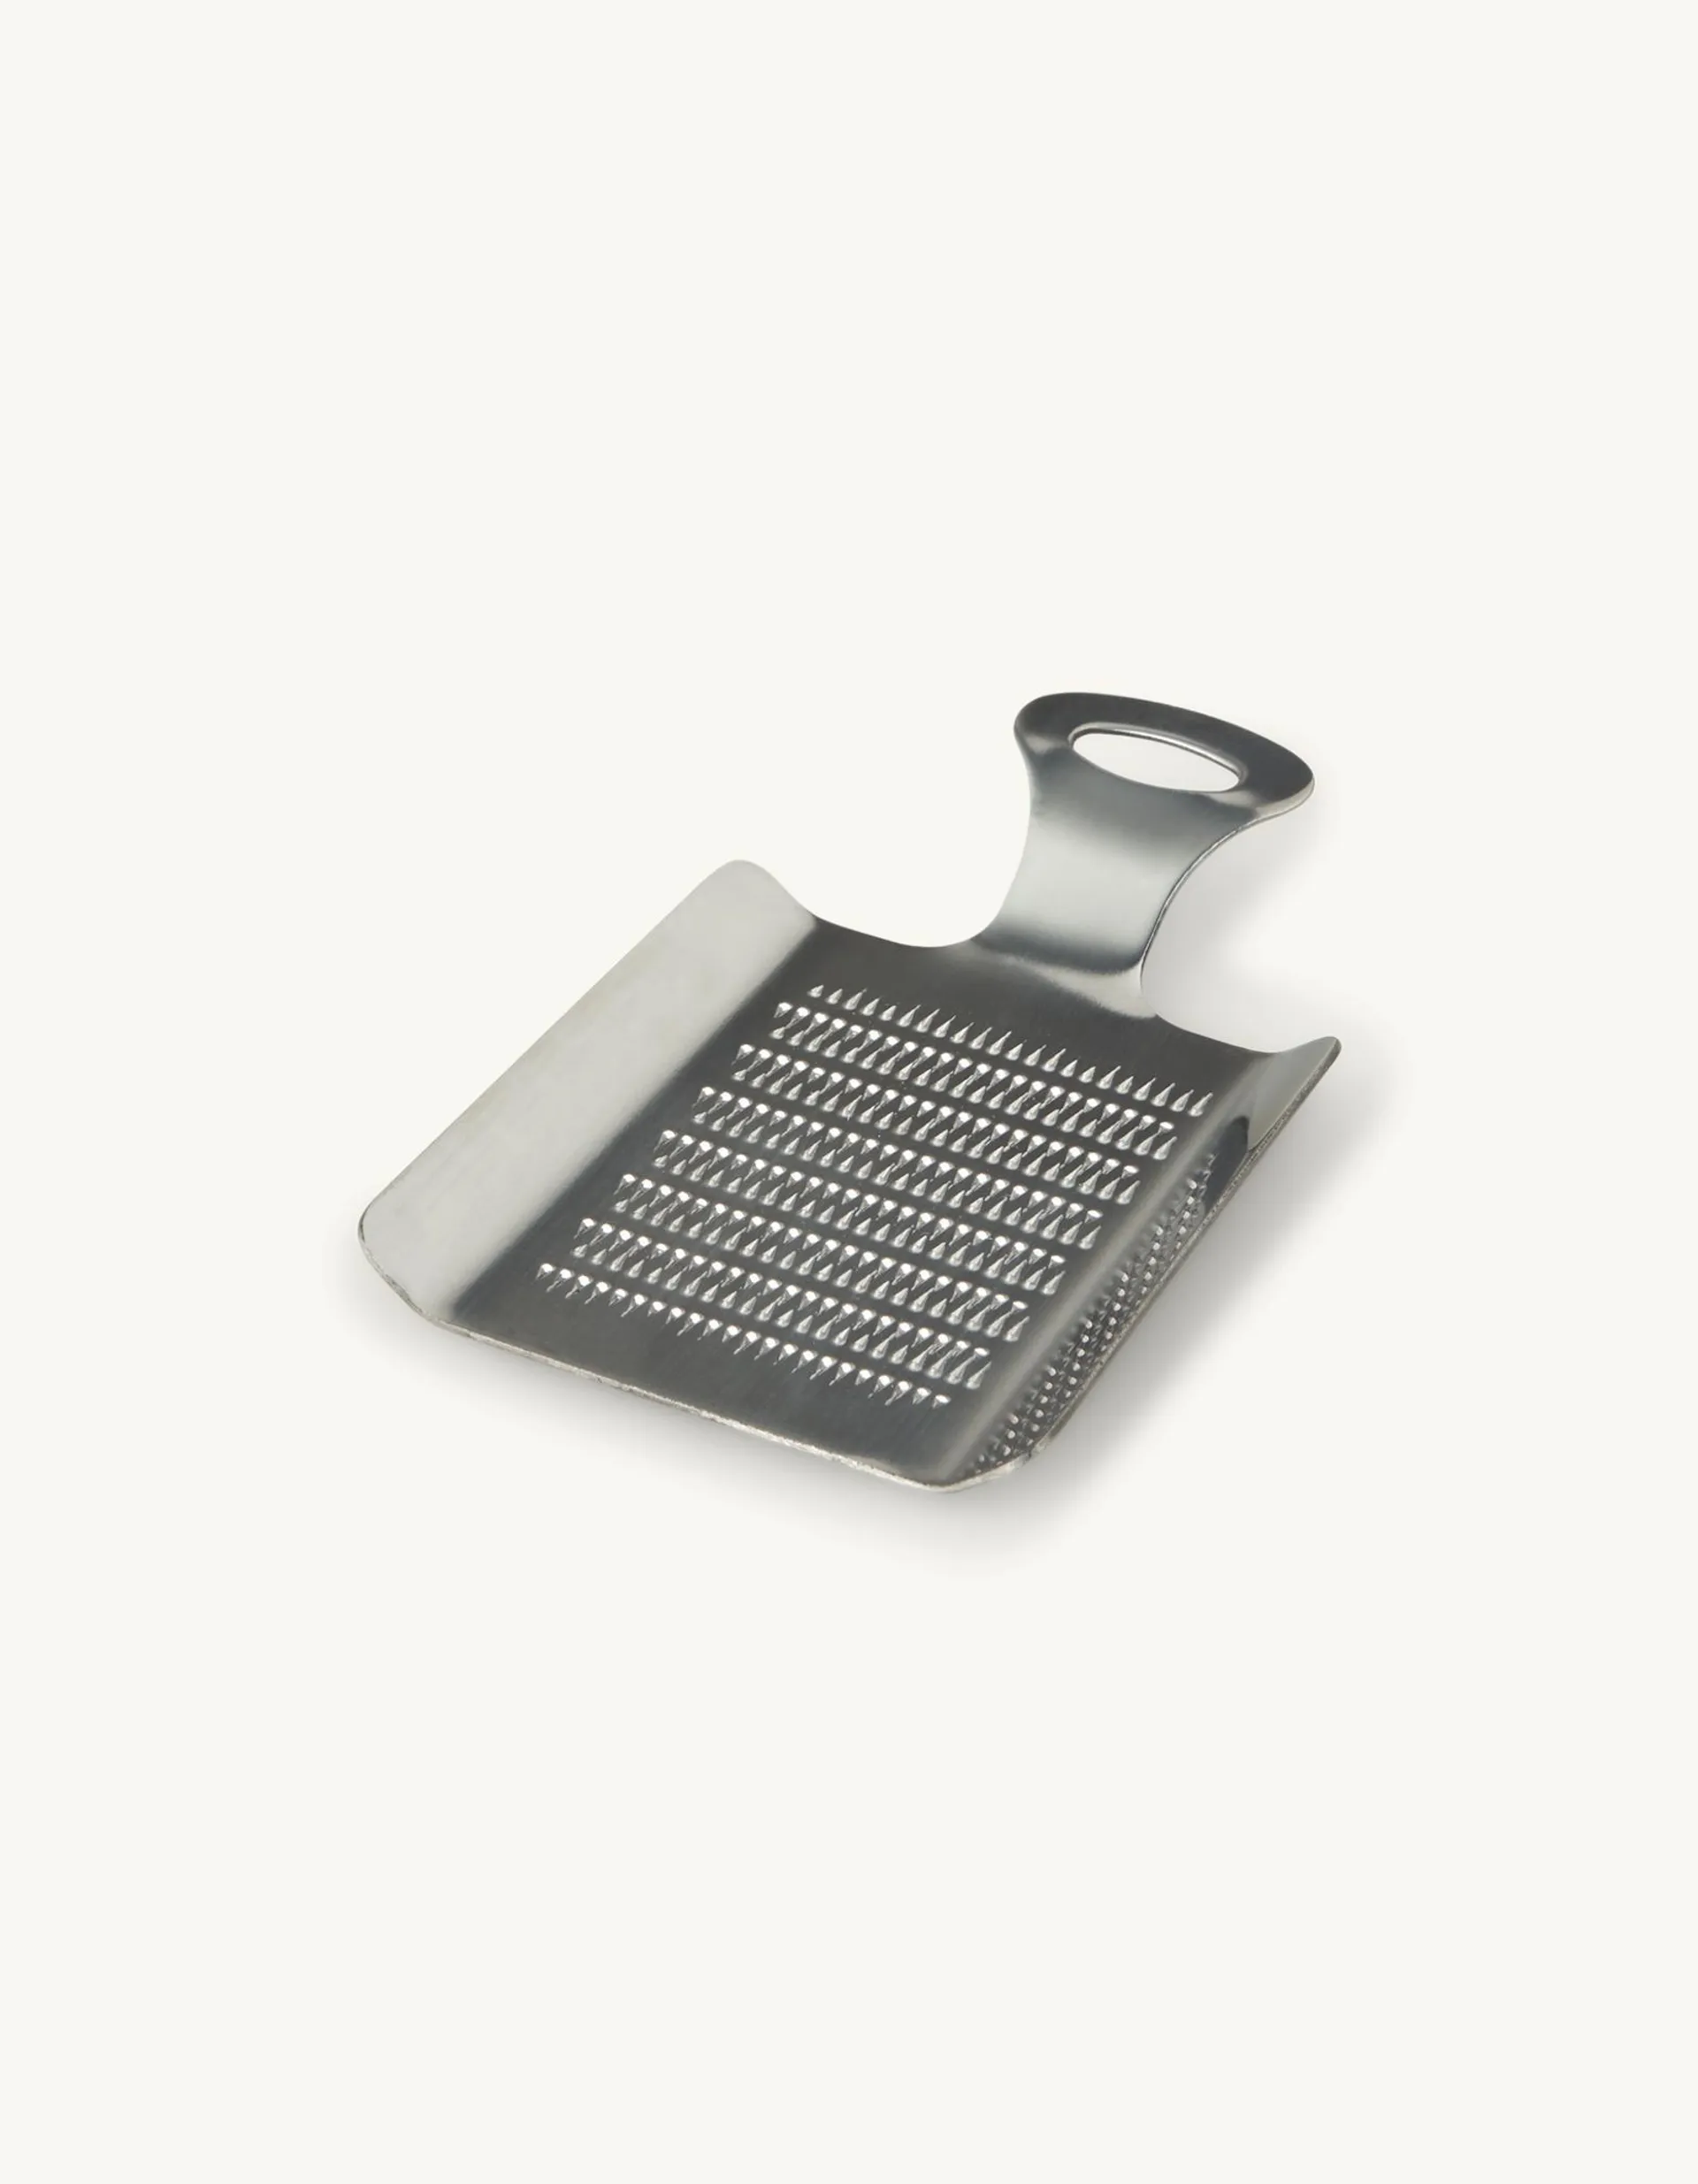 Mini grater Stainless steel. 11 x 7 cm.